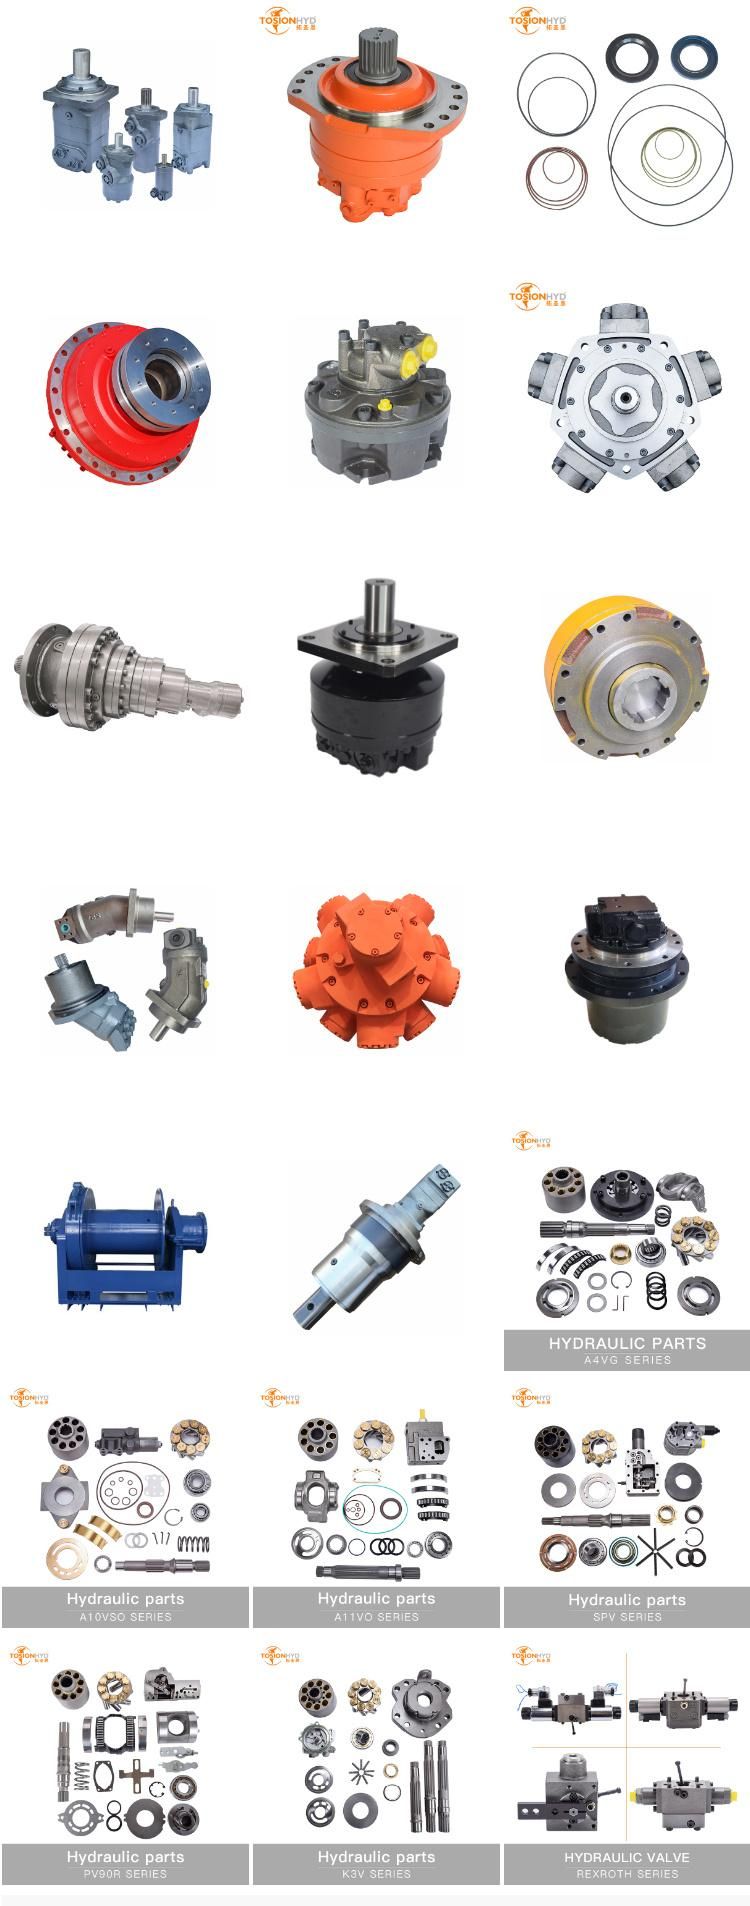 A2FM 28 Hydraulic Motor Parts with Rexroth Spare Repair Kits